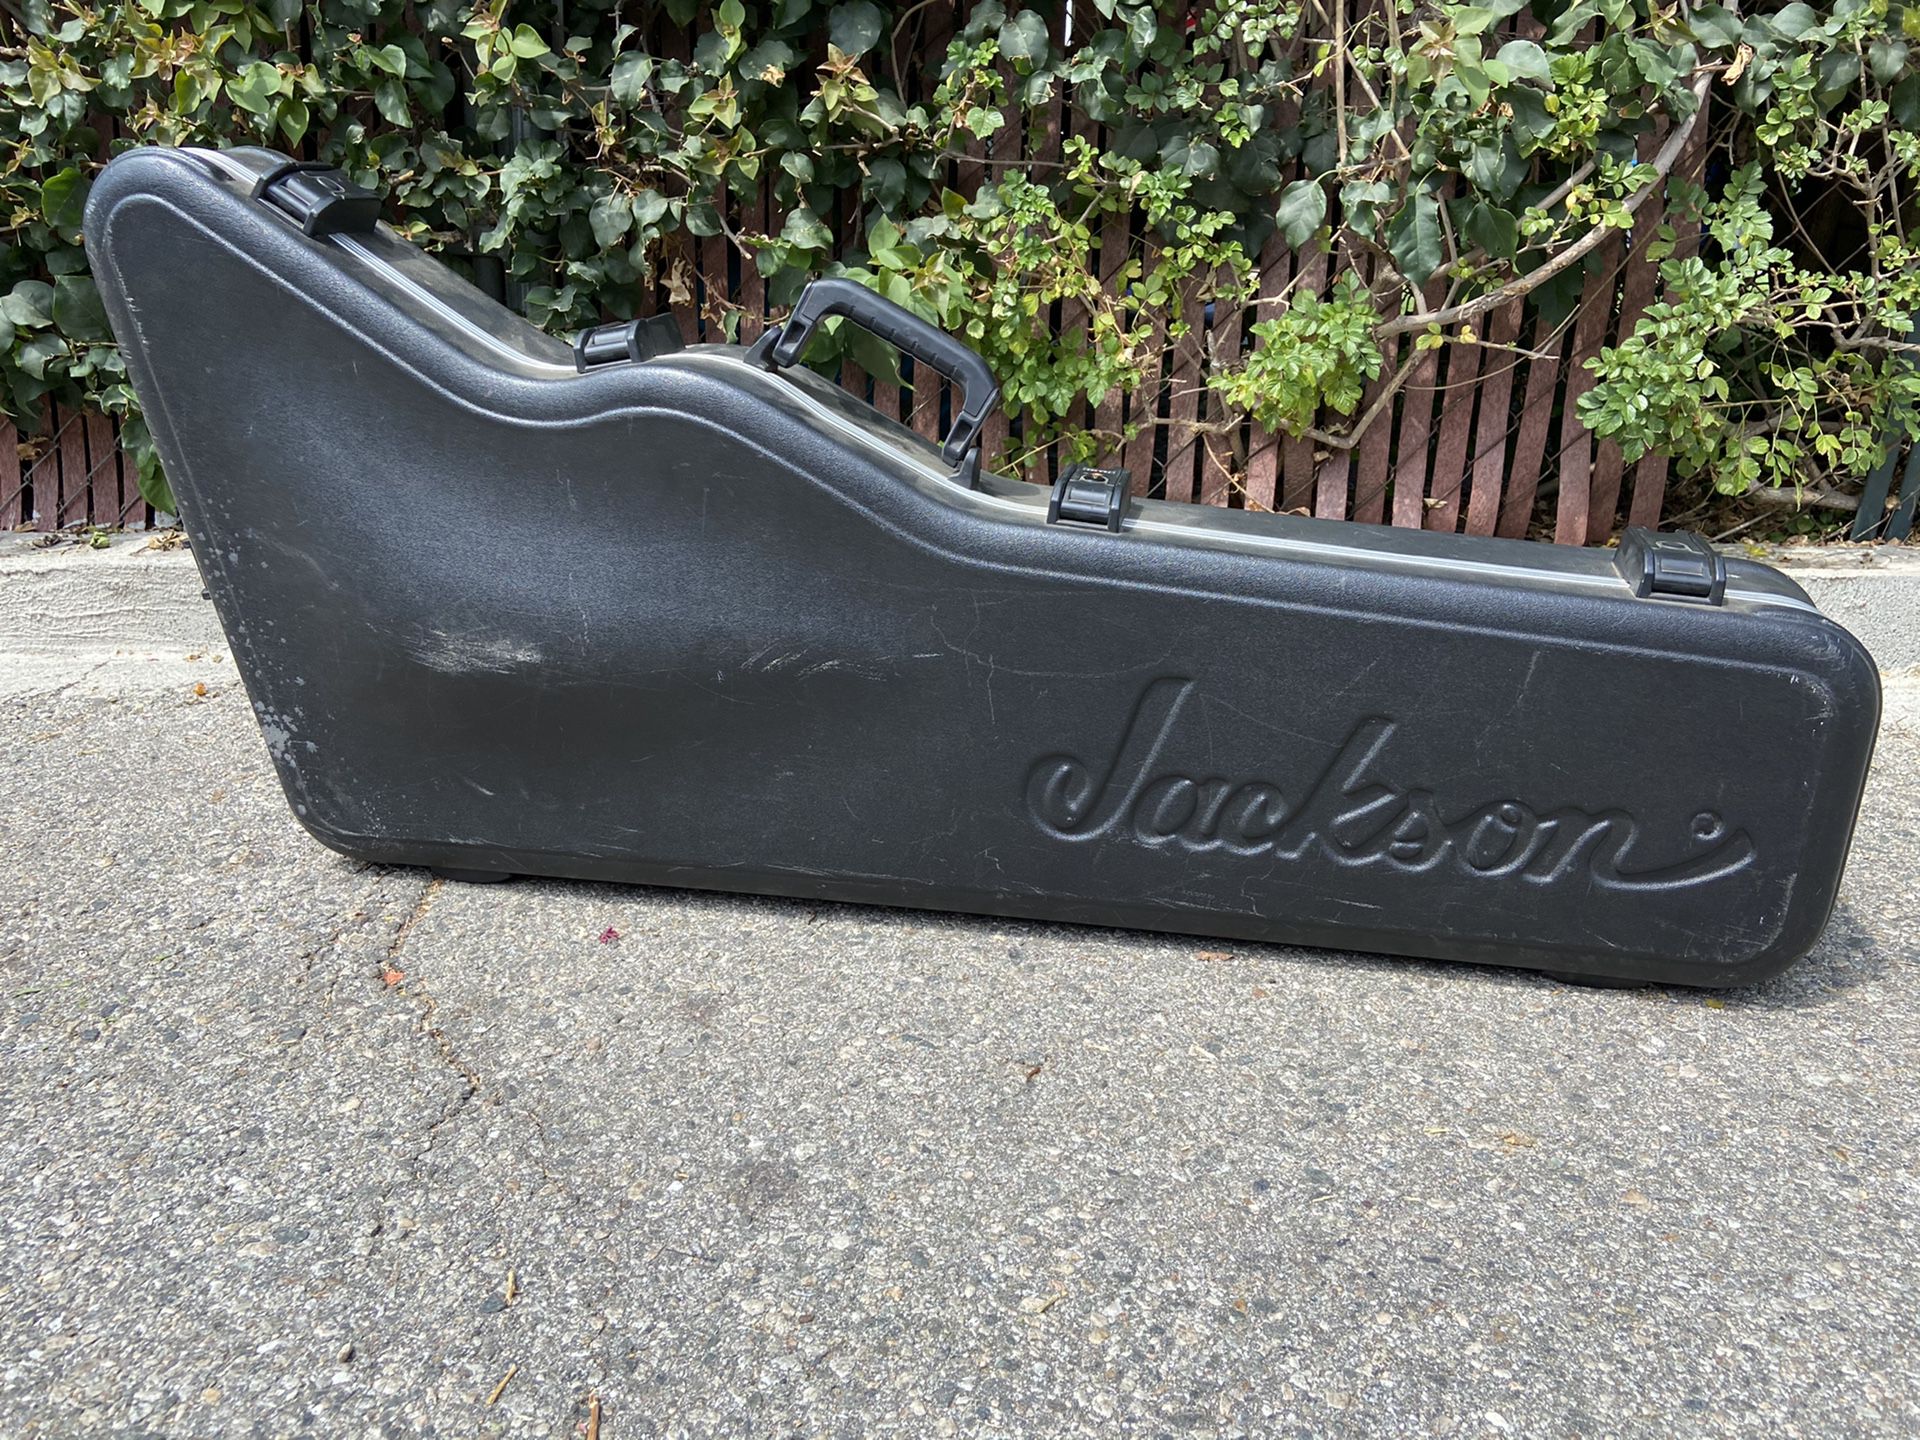 Rocking Jackson Kelly electric GUITAR CASE size - Overall size 47" x 21" x 6" with an interior length from end to end is 42 inches for the guitar p